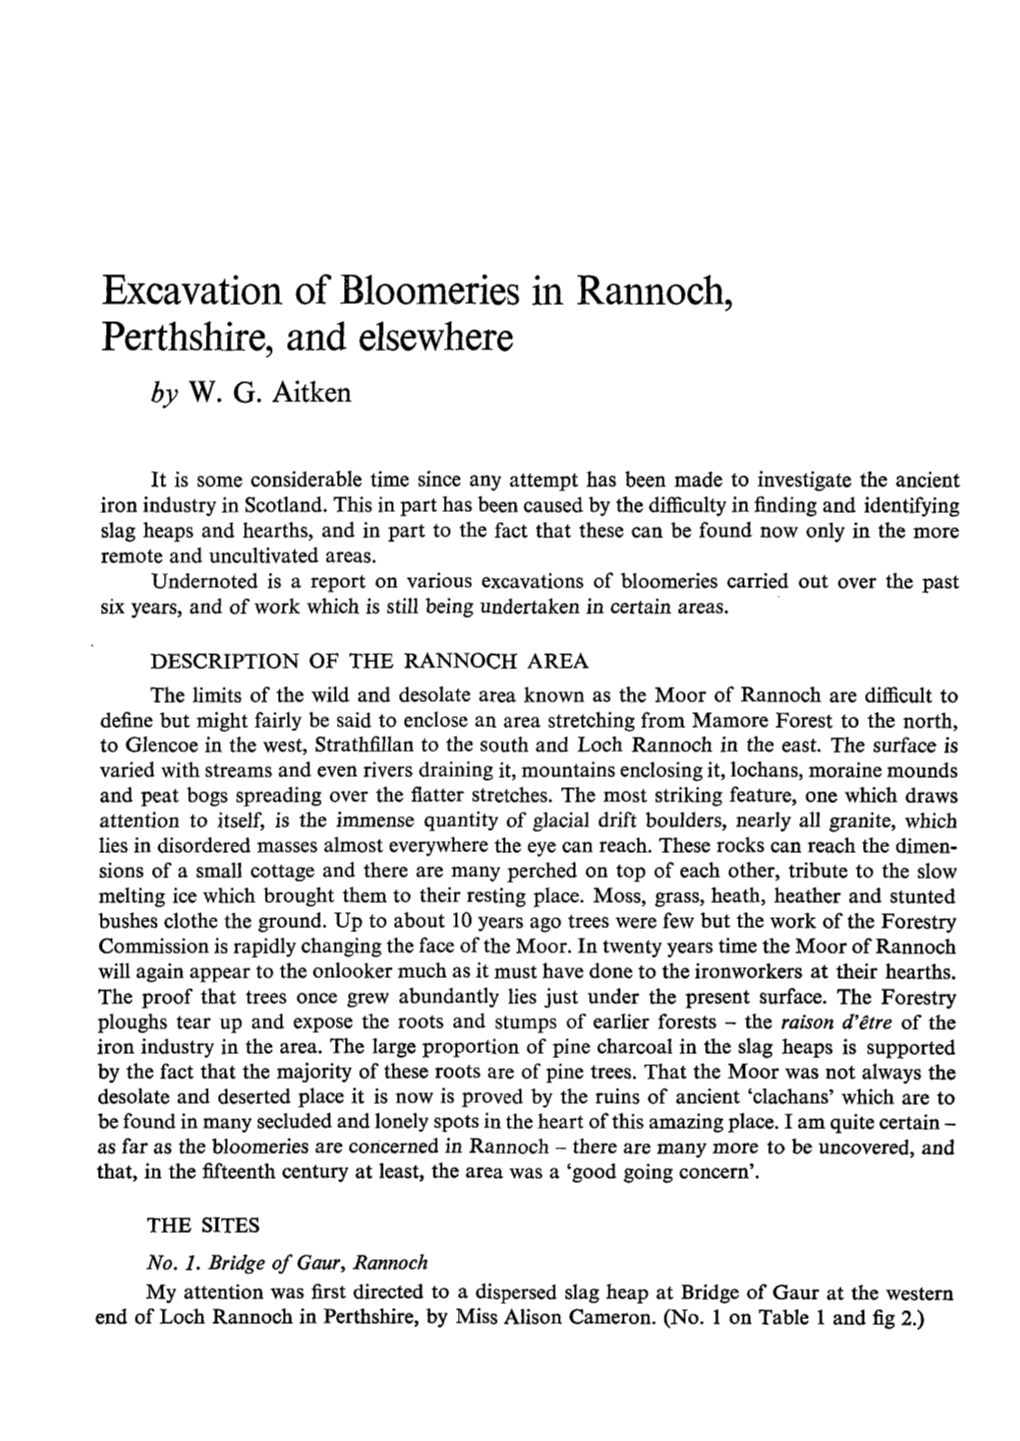 Excavation of Bloomeries in Rannoch, Perthshire, and Elsewhere by W